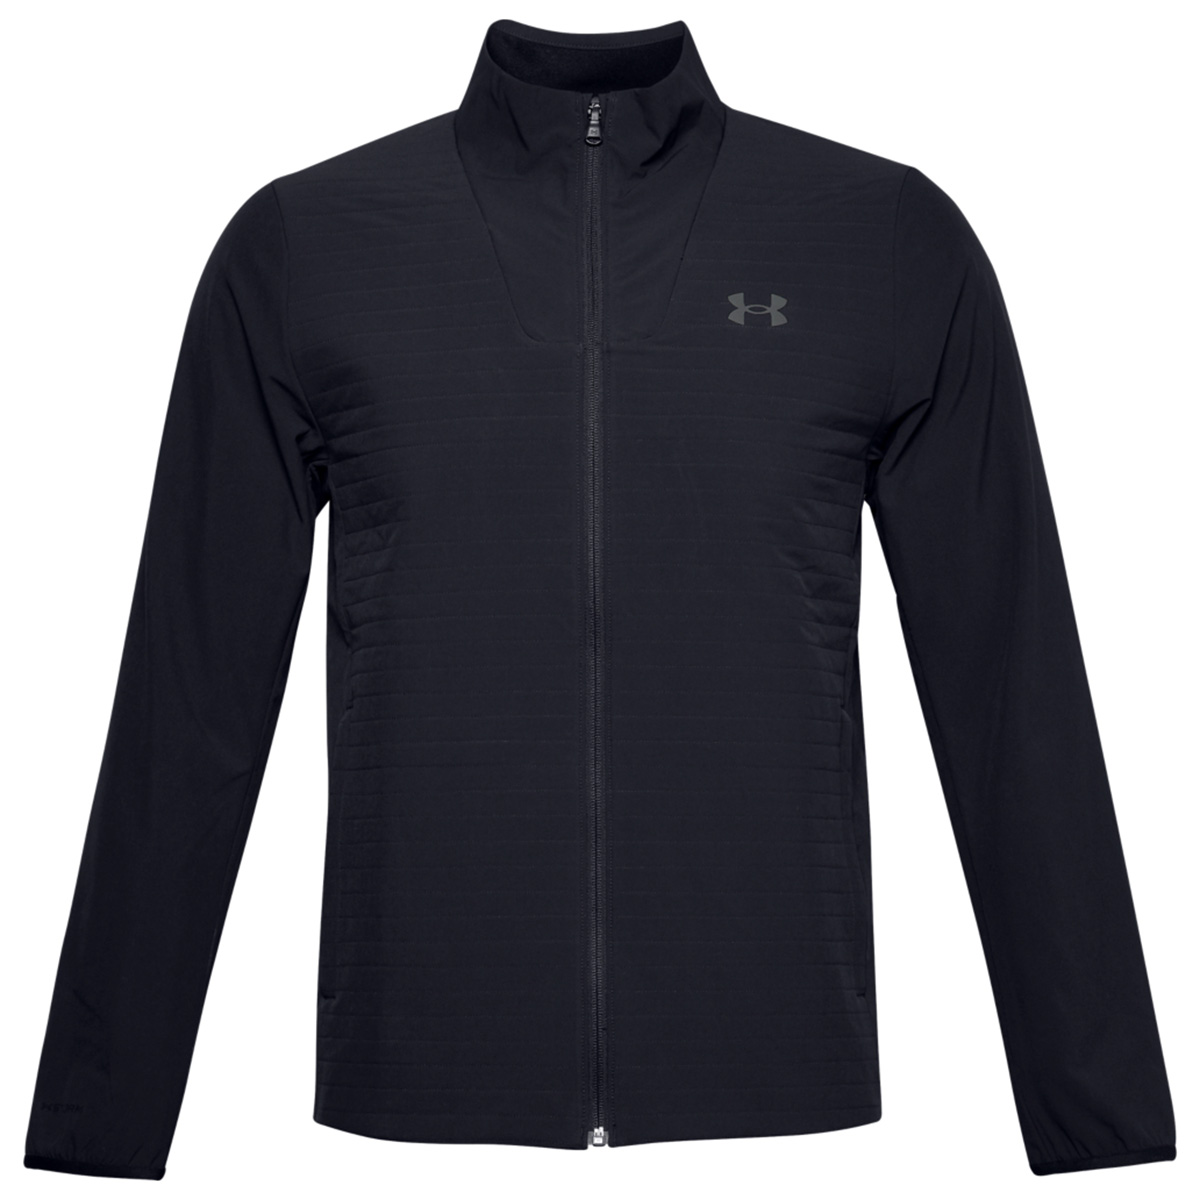 Under Armour Storm Revo Jacket from 